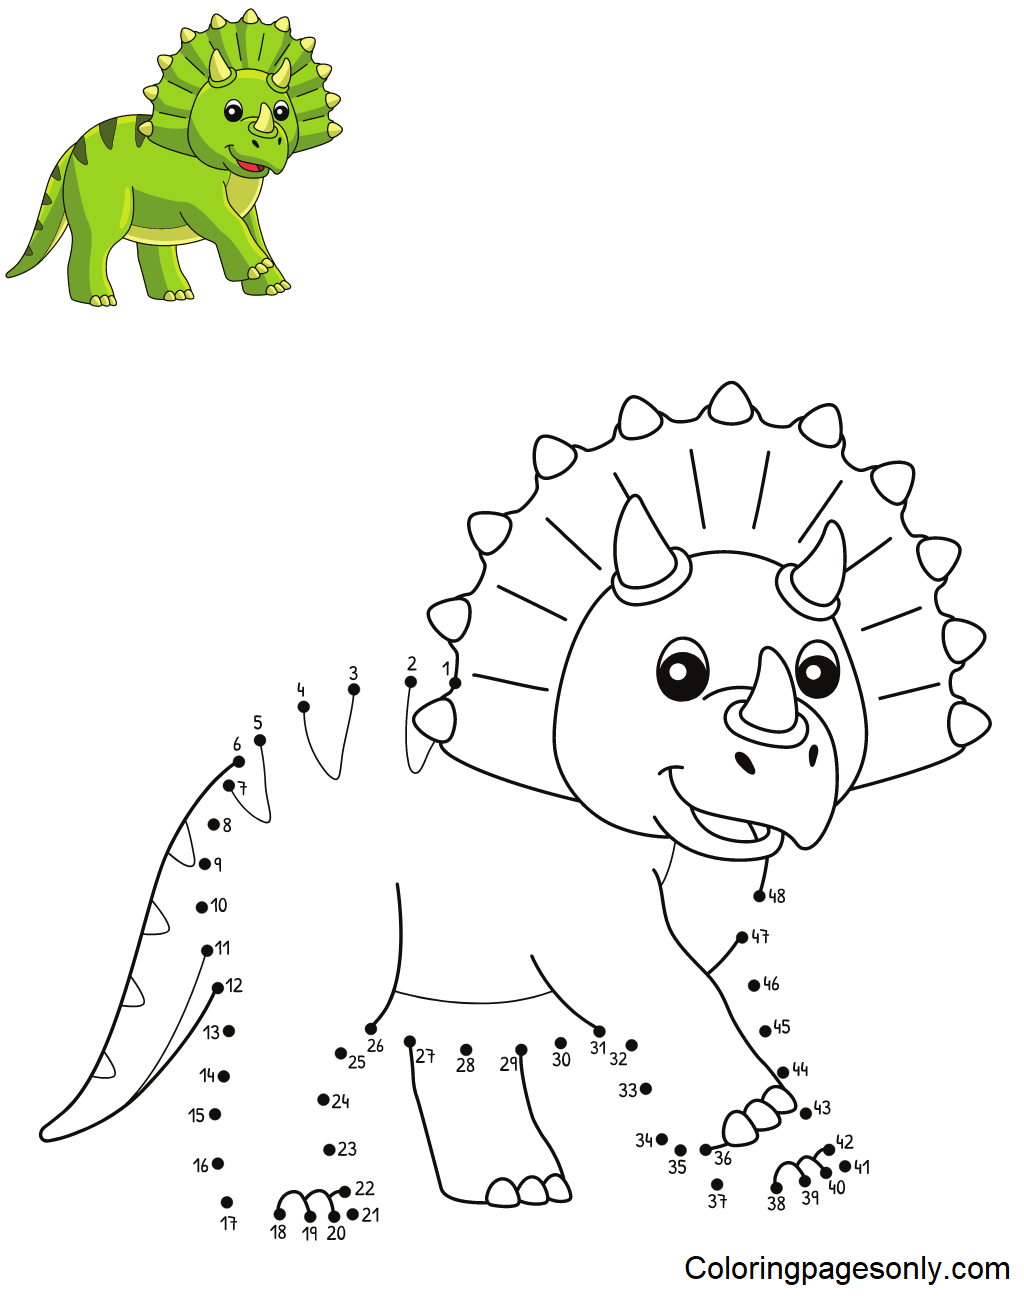 Dot to Dot Triceratops Coloring Pages